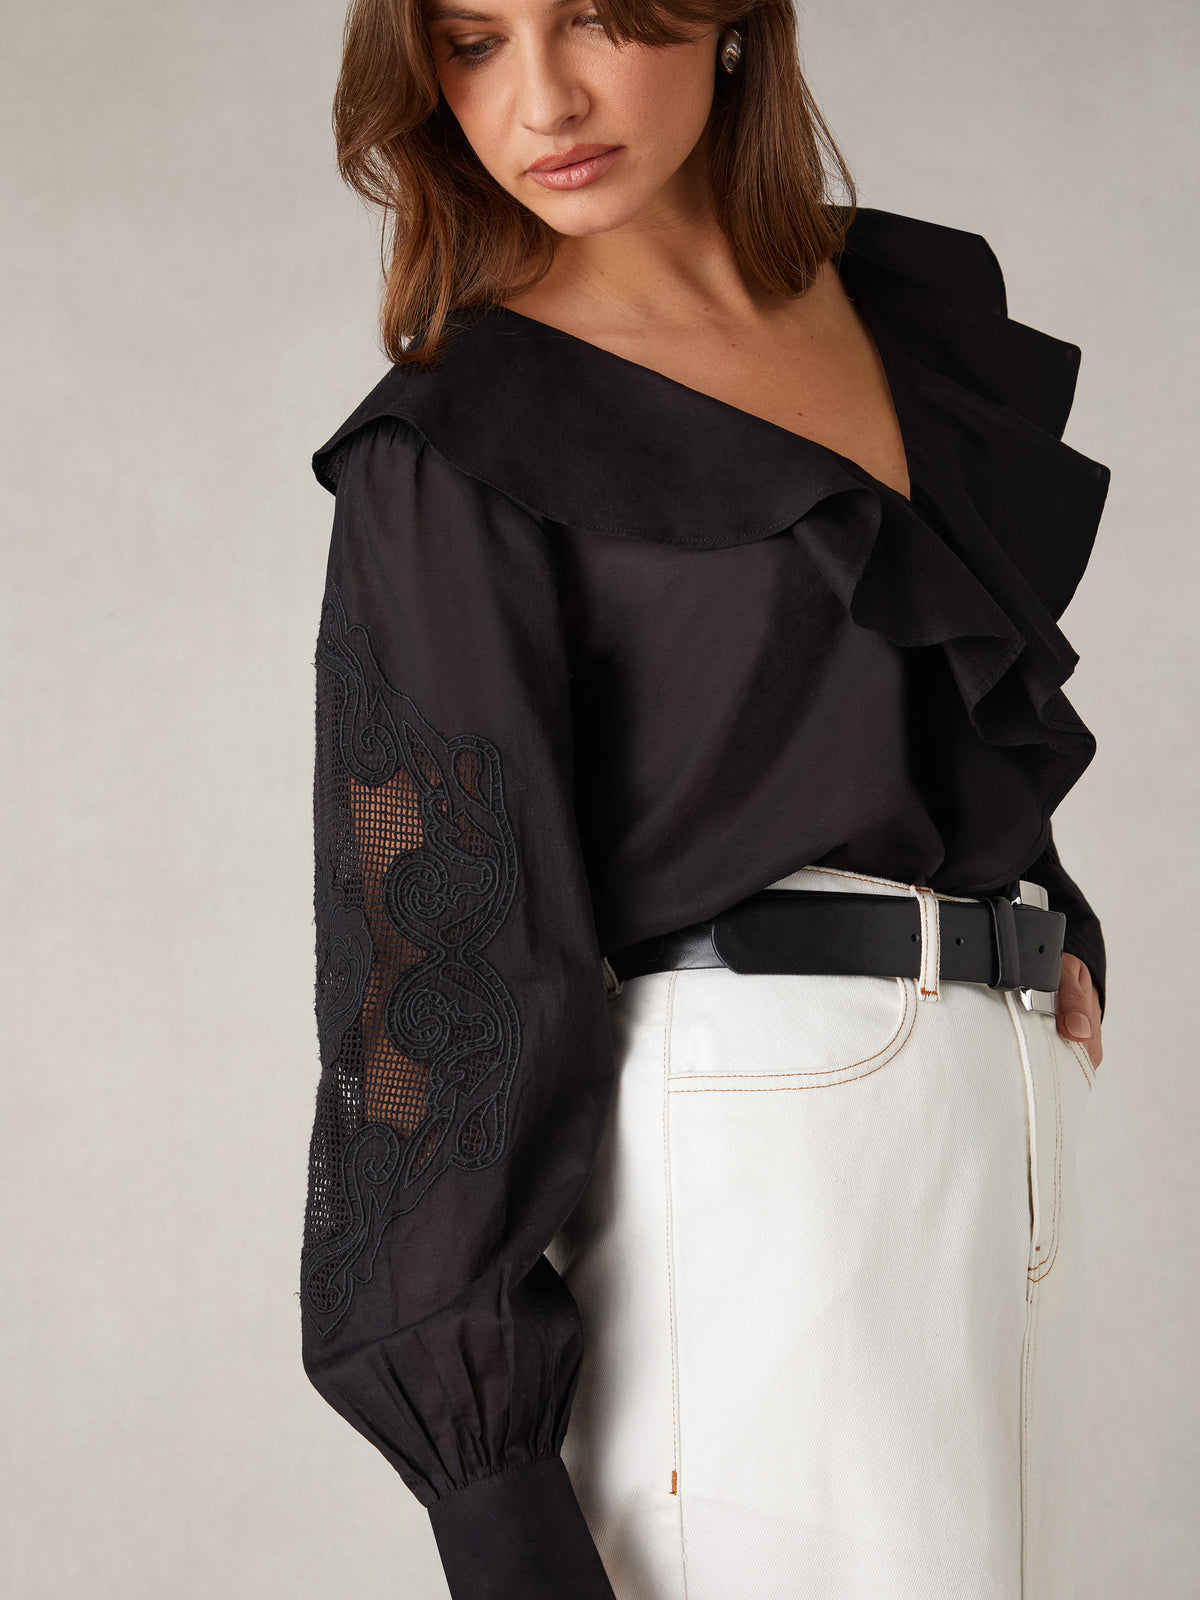 Black Embroidery Mesh Sleeve Blouse